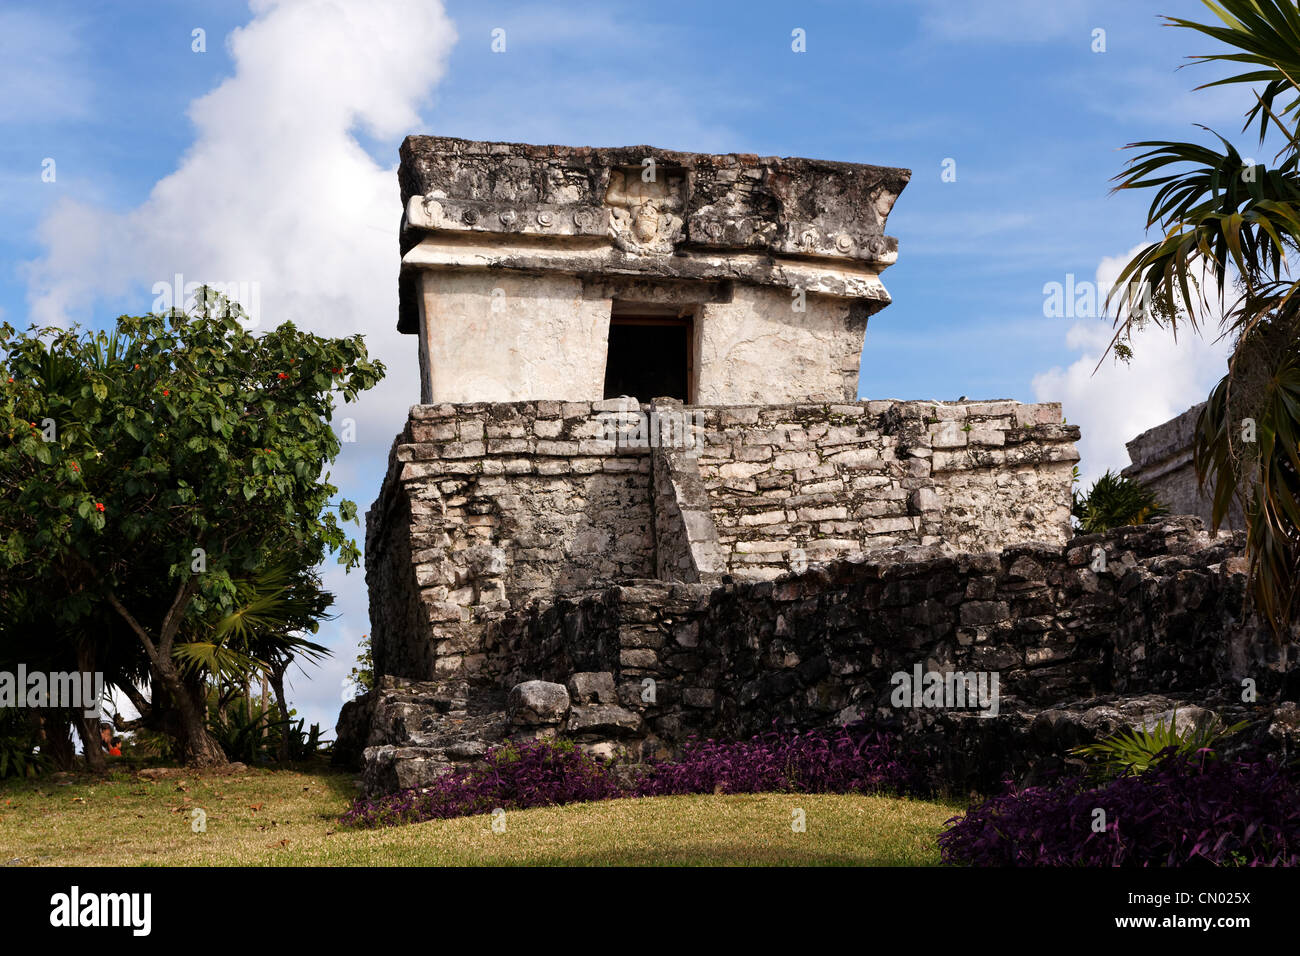 Well preserved Mayan building at the archaeological park of Tulum, Quintana Roo, Mexico. Stock Photo